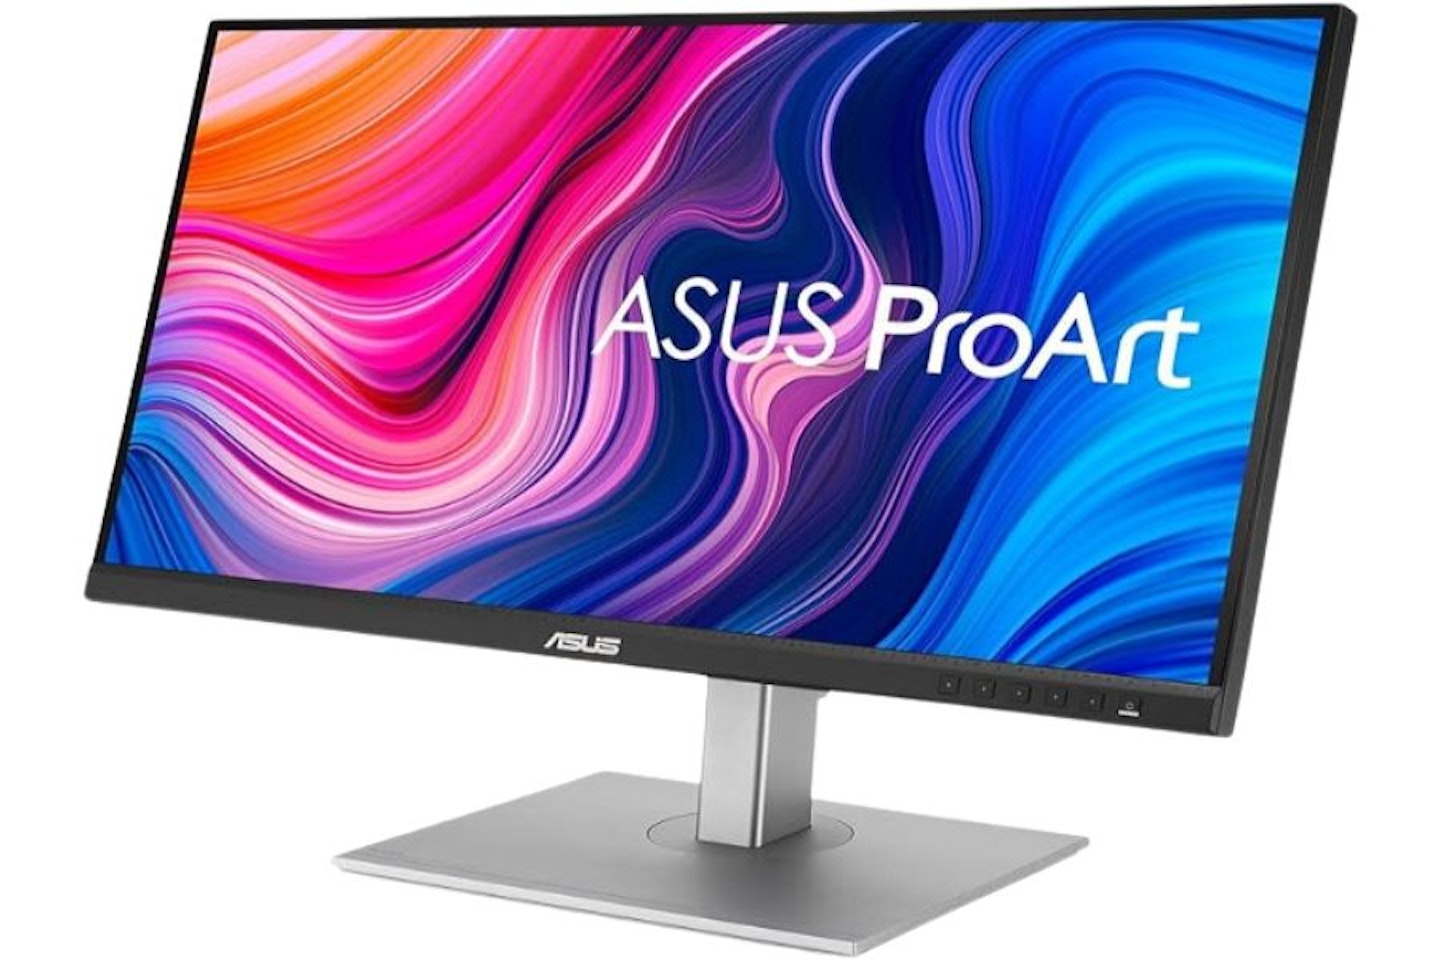 The Asus Pro Art monitor, with a colour gradient on the display